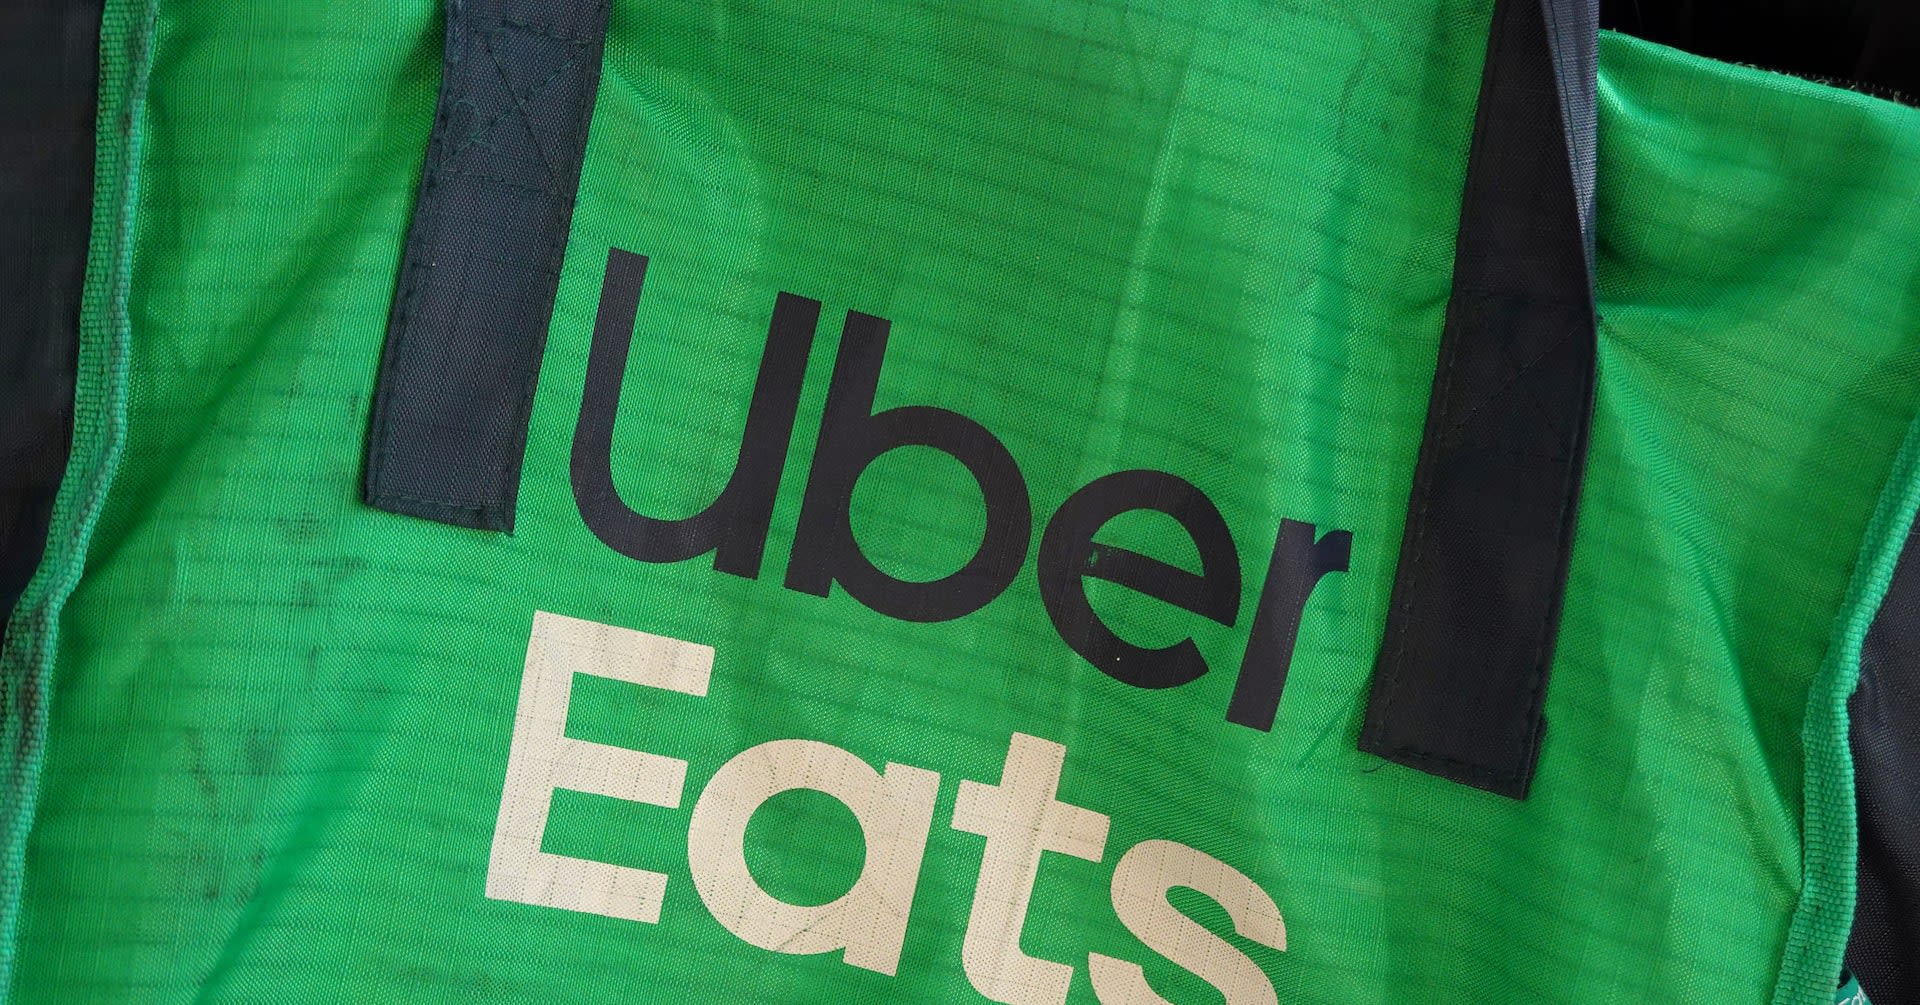 Instacart partners with Uber to offer food delivery services to customers in US